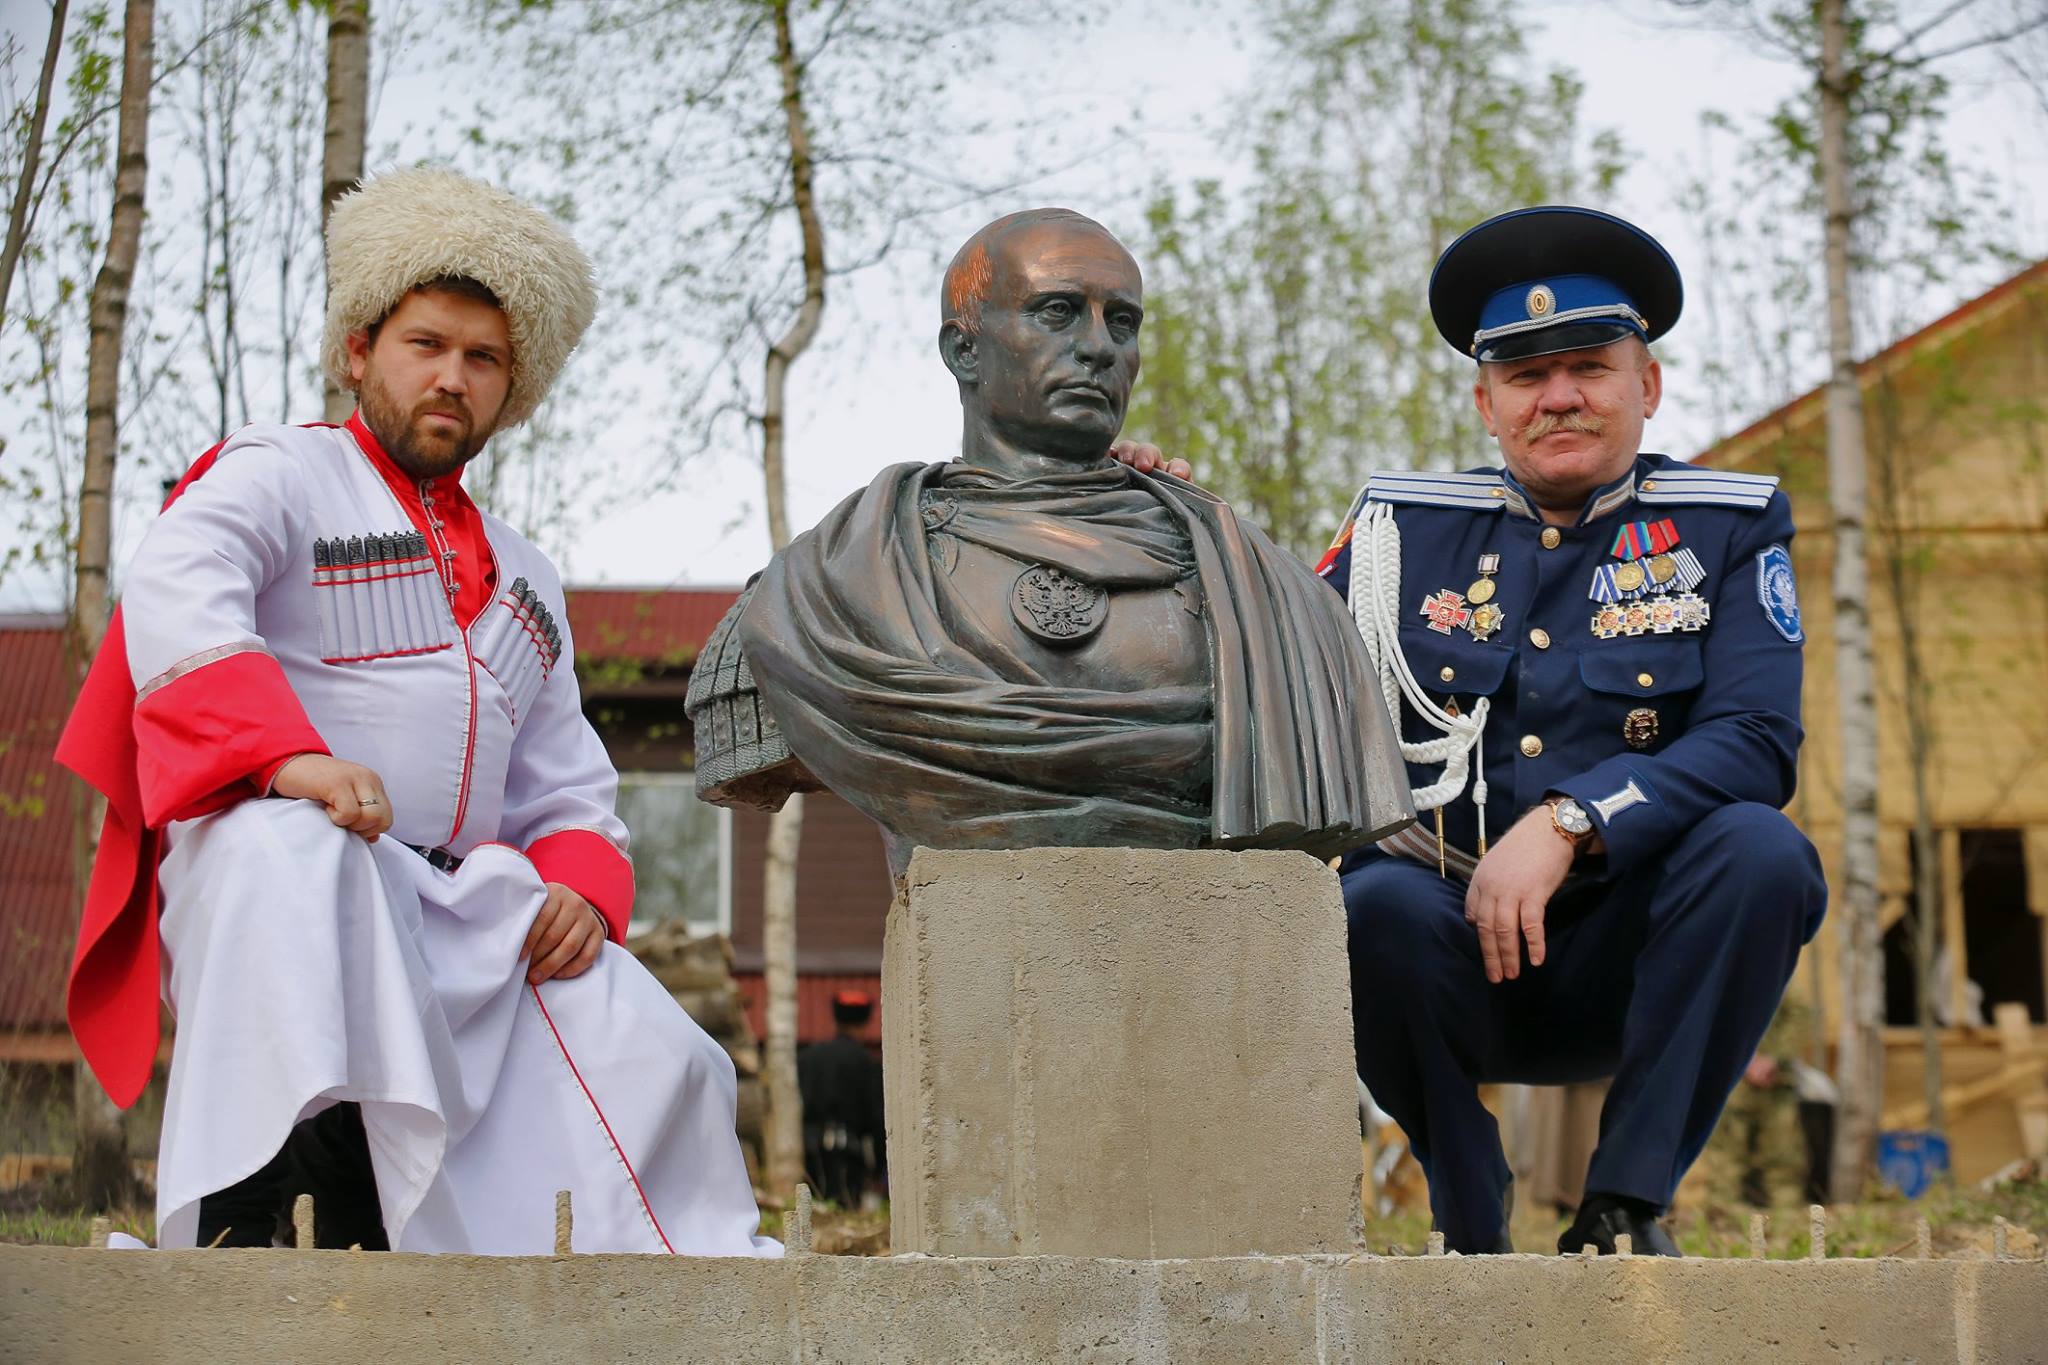 Russian neo-Cossack paramilitaries pose by a Putin monument in St. Petersburg, Russia